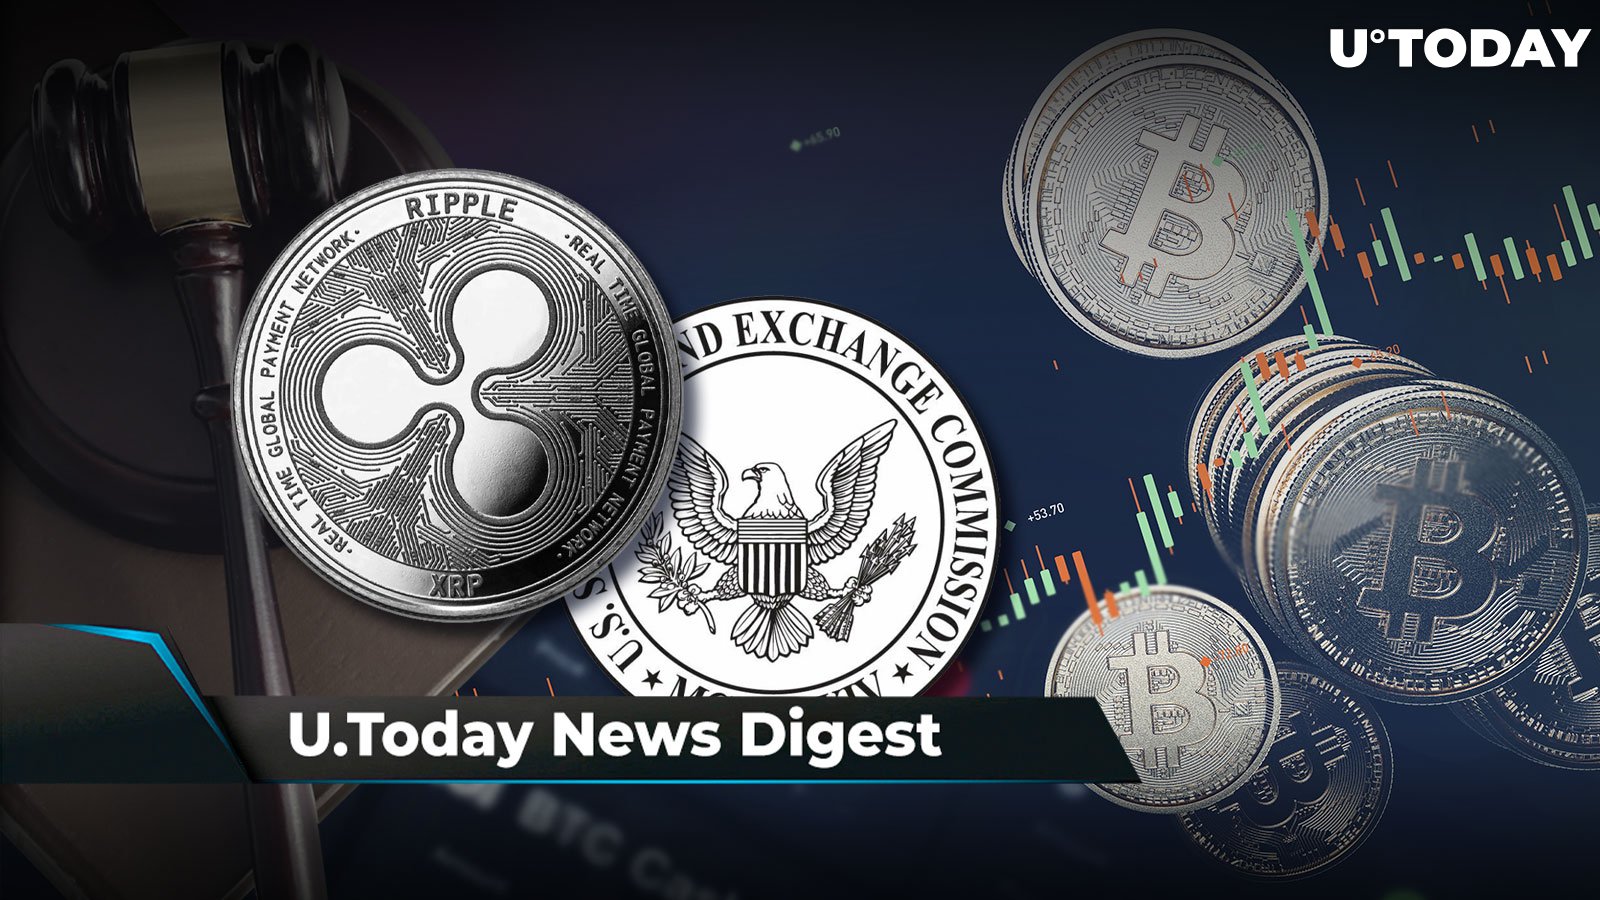 Here Are Next Key Dates in Ripple-SEC Lawsuit, BTC Just Broke New Record, Ripple Expands ODL to France and Sweden: Crypto News Digest by U.Today